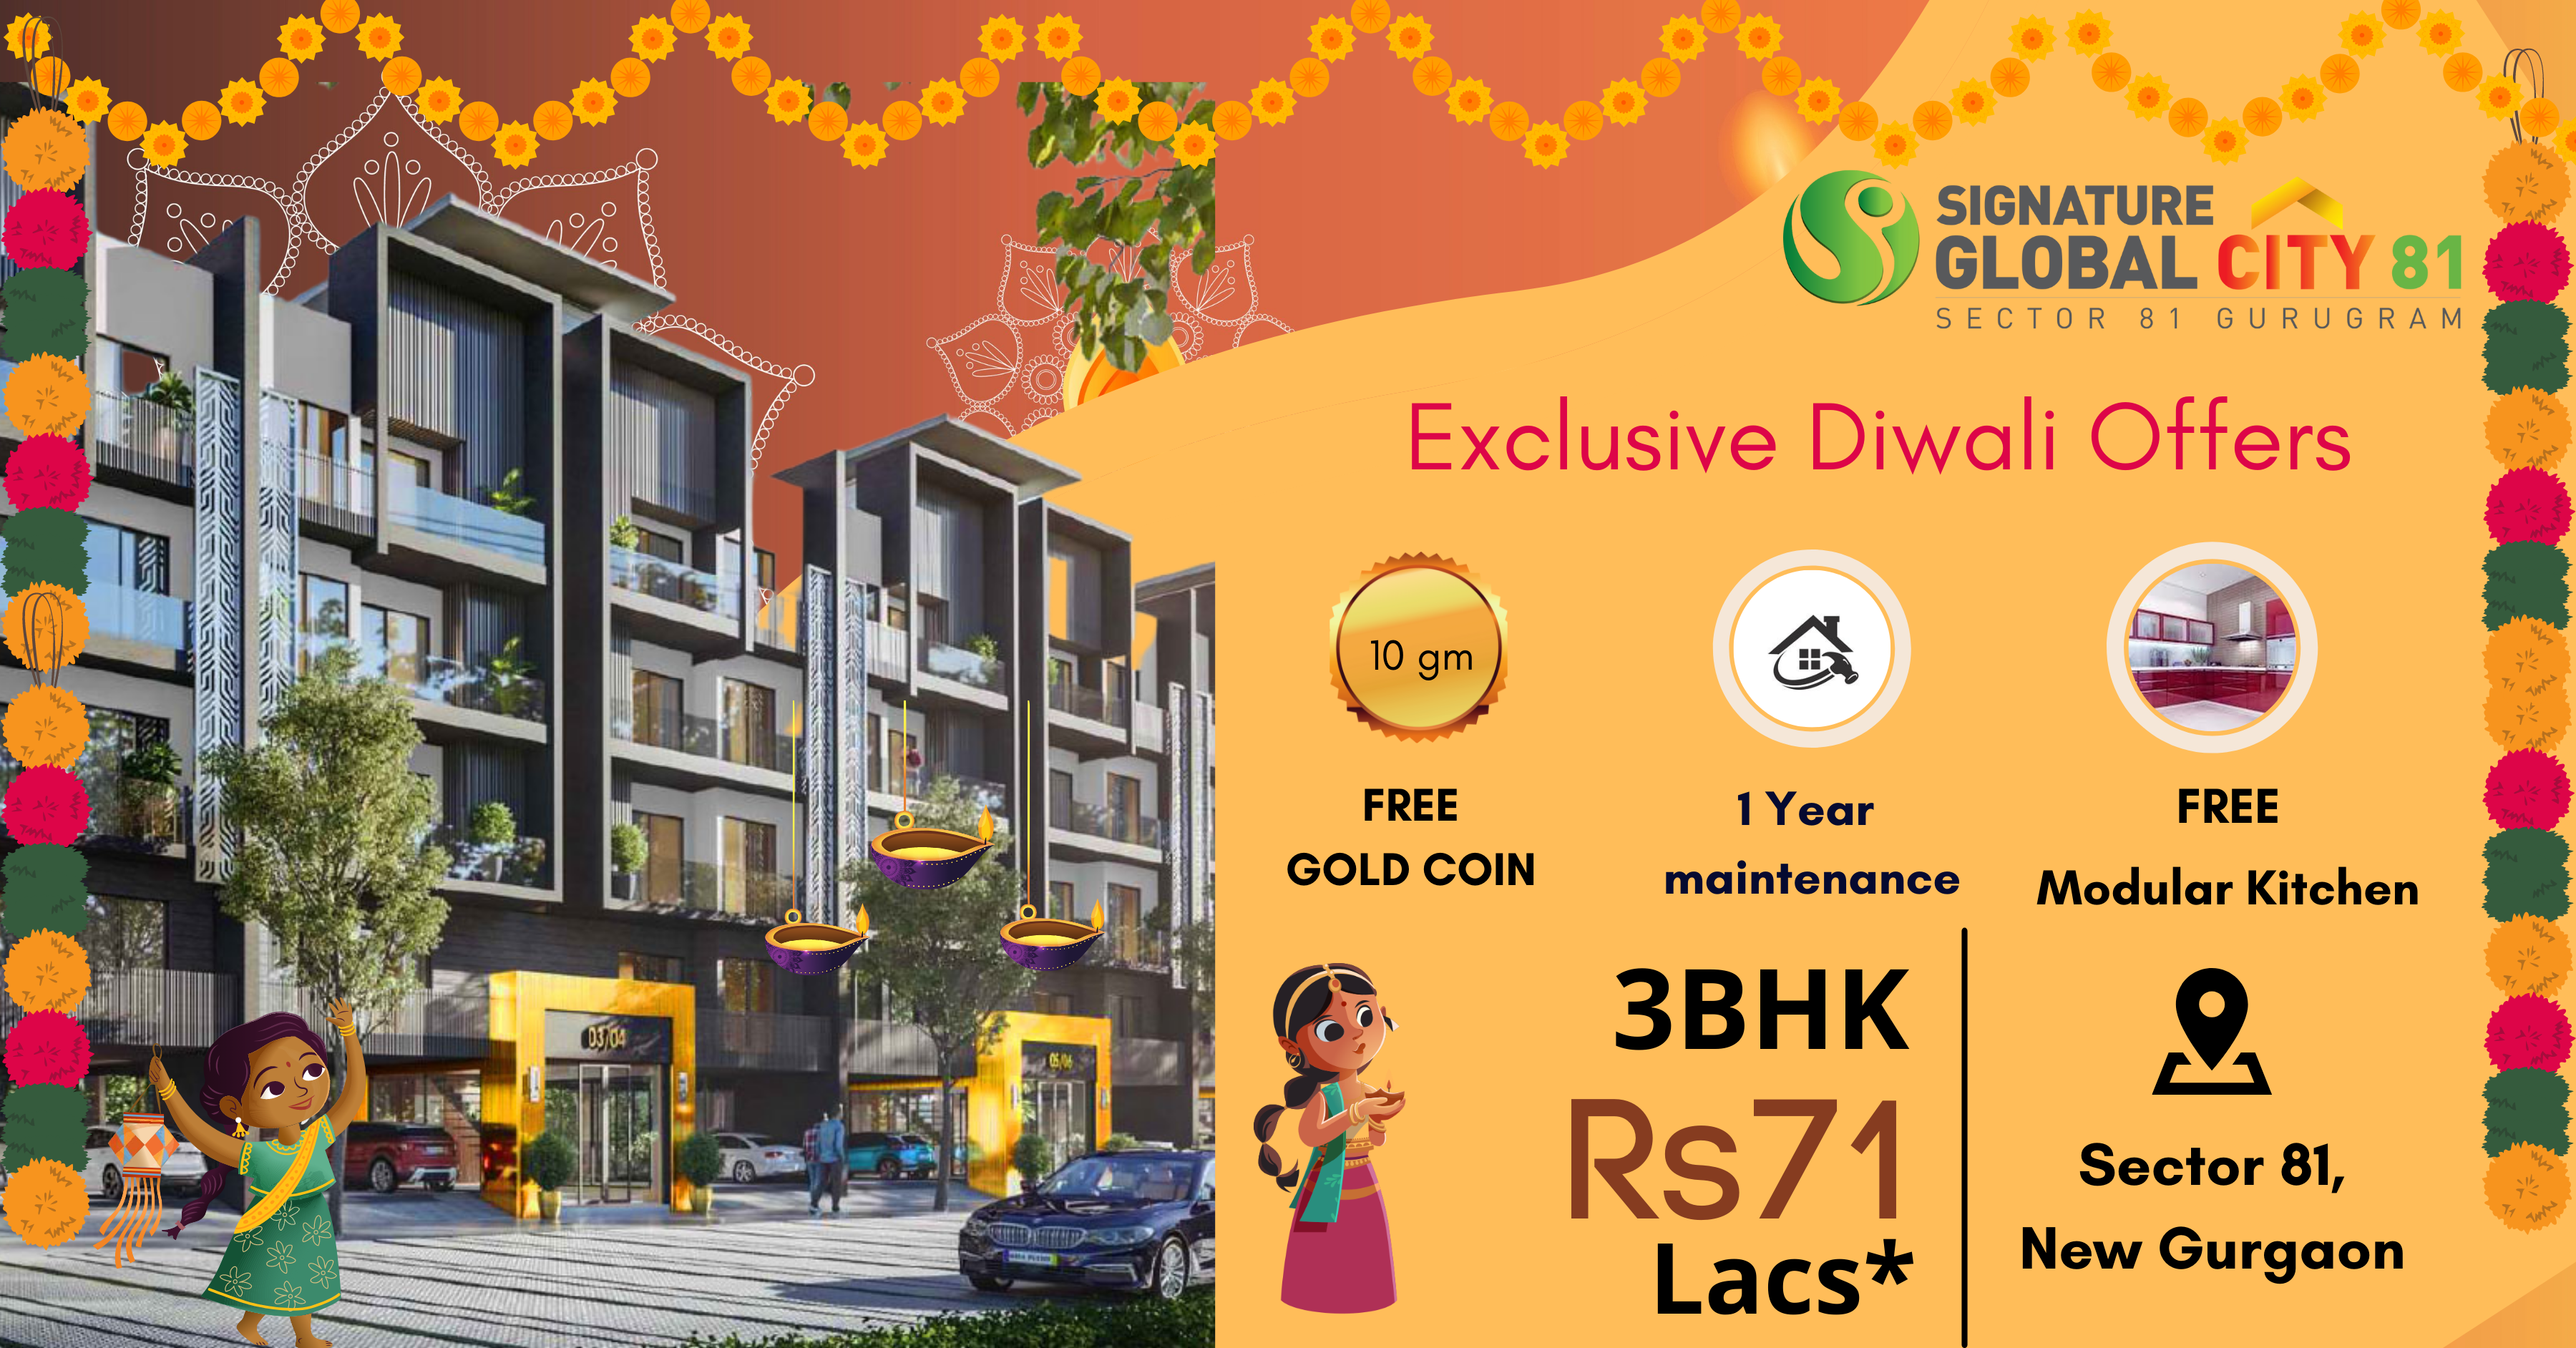 Exclusive Offers on this Diwali at Signature Global City 81 Offering 3 BHK @ 71 Lacs* in Sector 81, Gurgaon Update